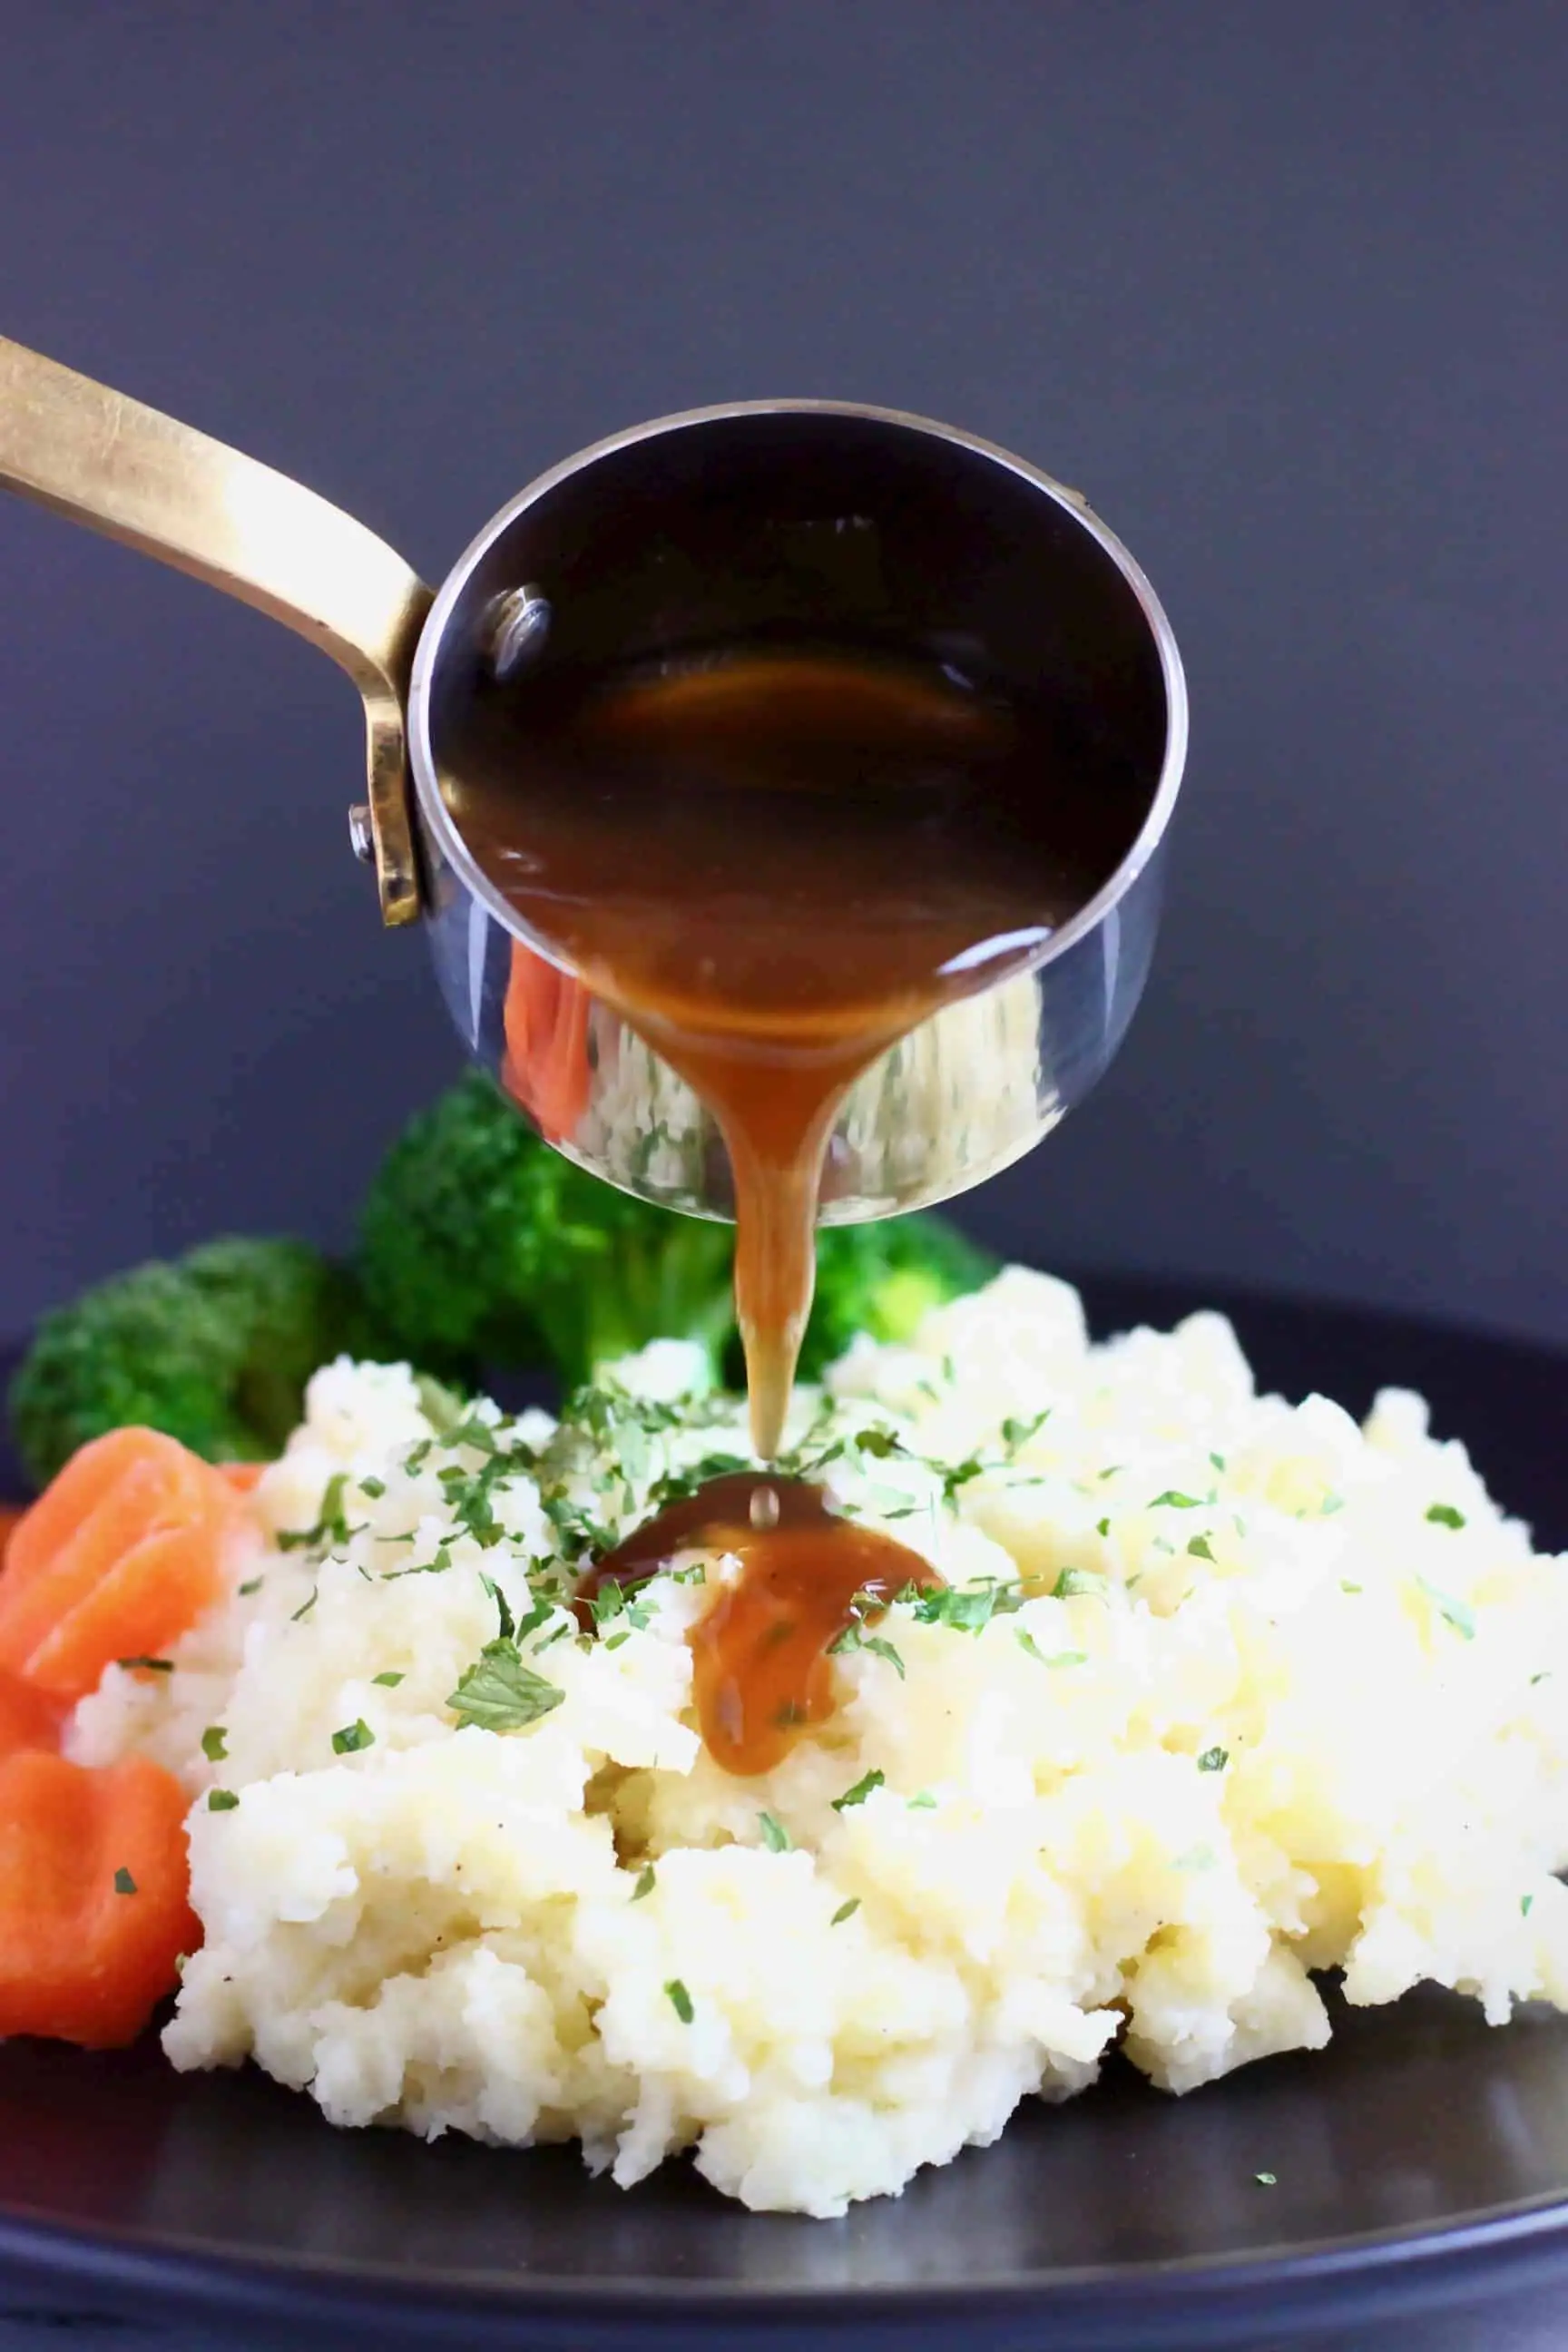 A pile of mashed potatoes topped with green herbs with sliced carrots and broccoli on a black plate with brown gravy being poured over in a silver saucepan 